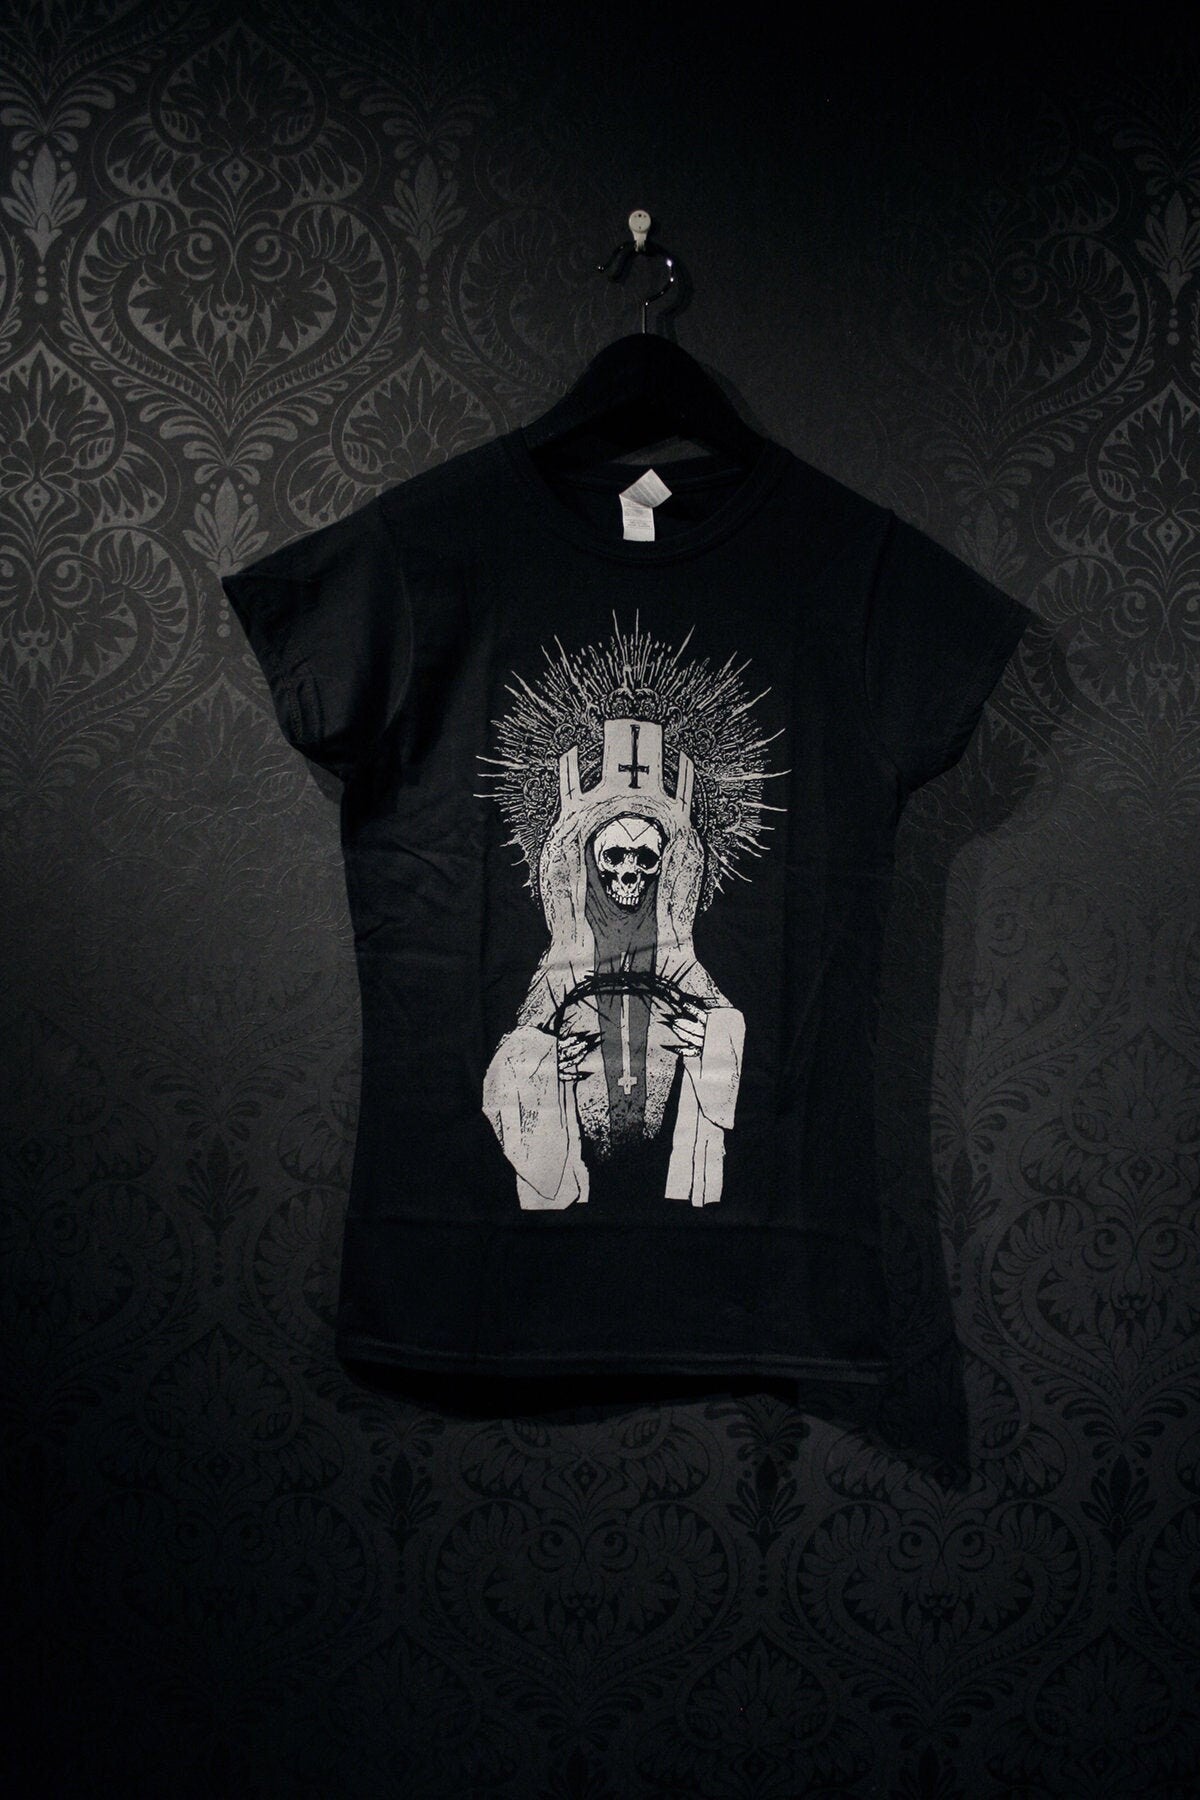 Saint of death, holy death - T-shirt Female fitted